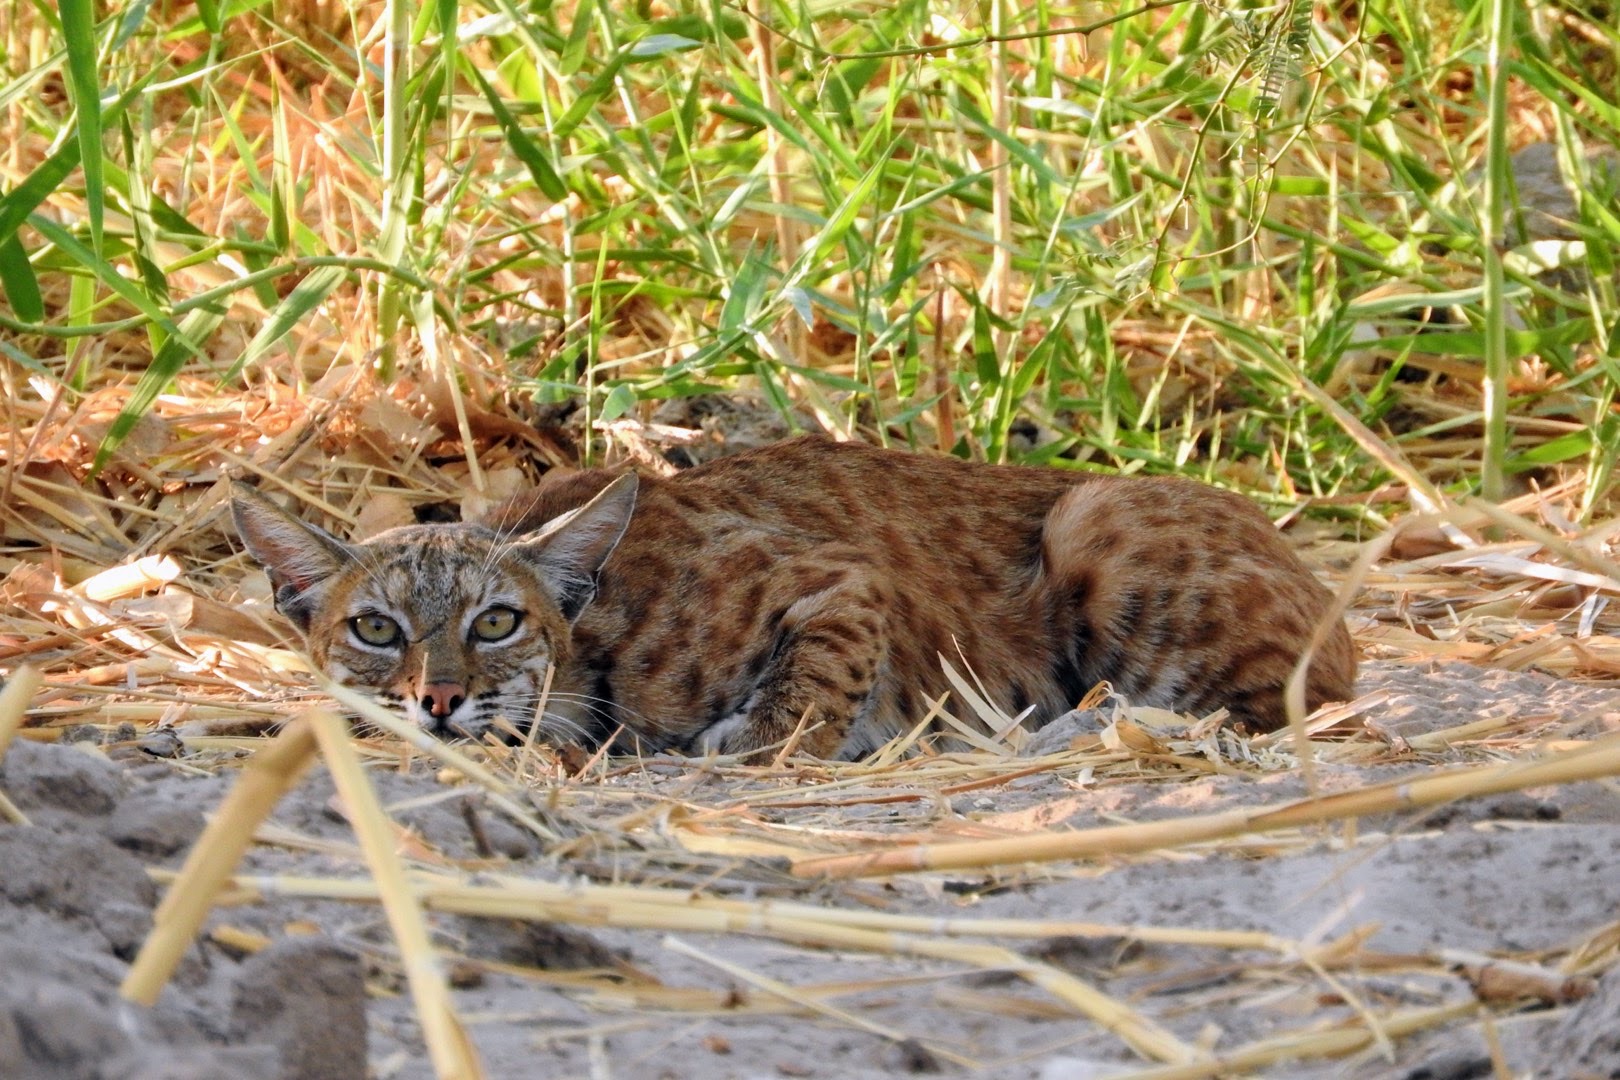 Photo by Banook rodarte  |  I saw this bobcat from a distance and I decided to take its picture.I zoomed in with my Nikon camera